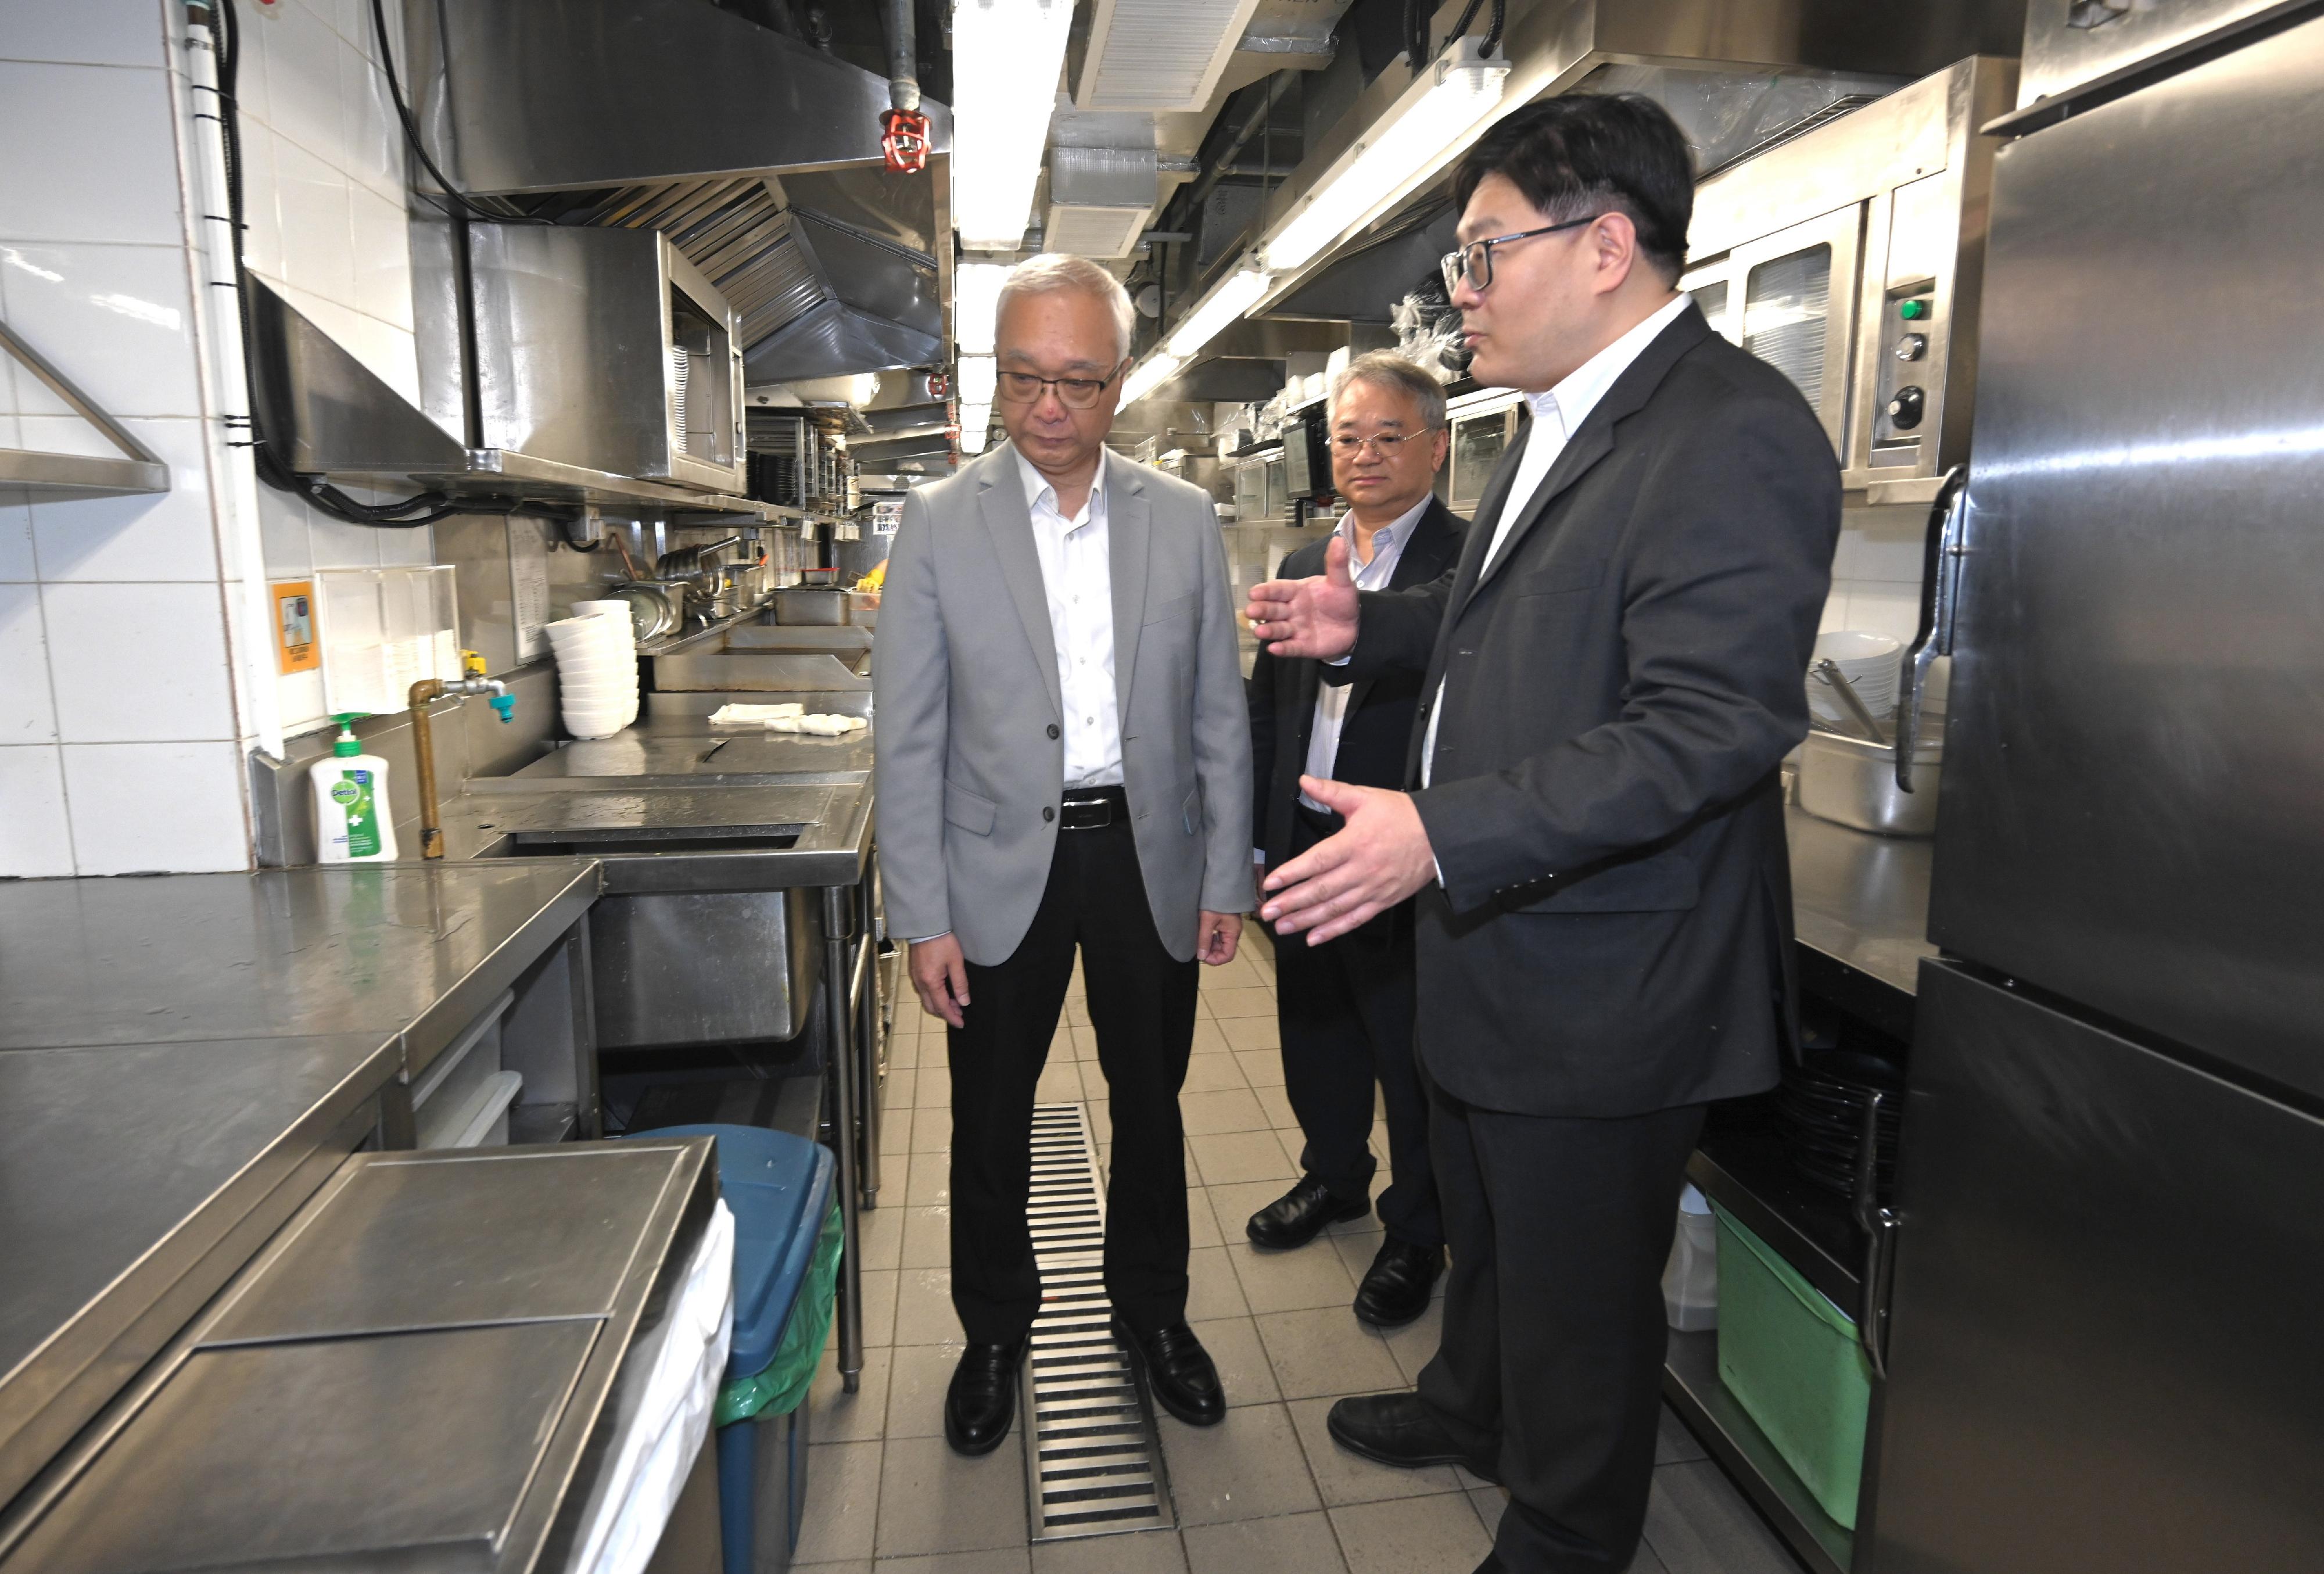 The Secretary for Environment and Ecology, Mr Tse Chin-wan, today (March 27) inspected various premises under the Municipal Solid Waste Charging Demonstration Scheme to understand the premises' preparatory work. Photo shows Mr Tse (left) and the Director of Environmental Protection, Dr Samuel Chui (centre), inspecting the process of a fast food restaurant chain's kitchen in handling waste and learning about the practical arrangements and requirements of the preparatory work for the Demonstration Scheme.